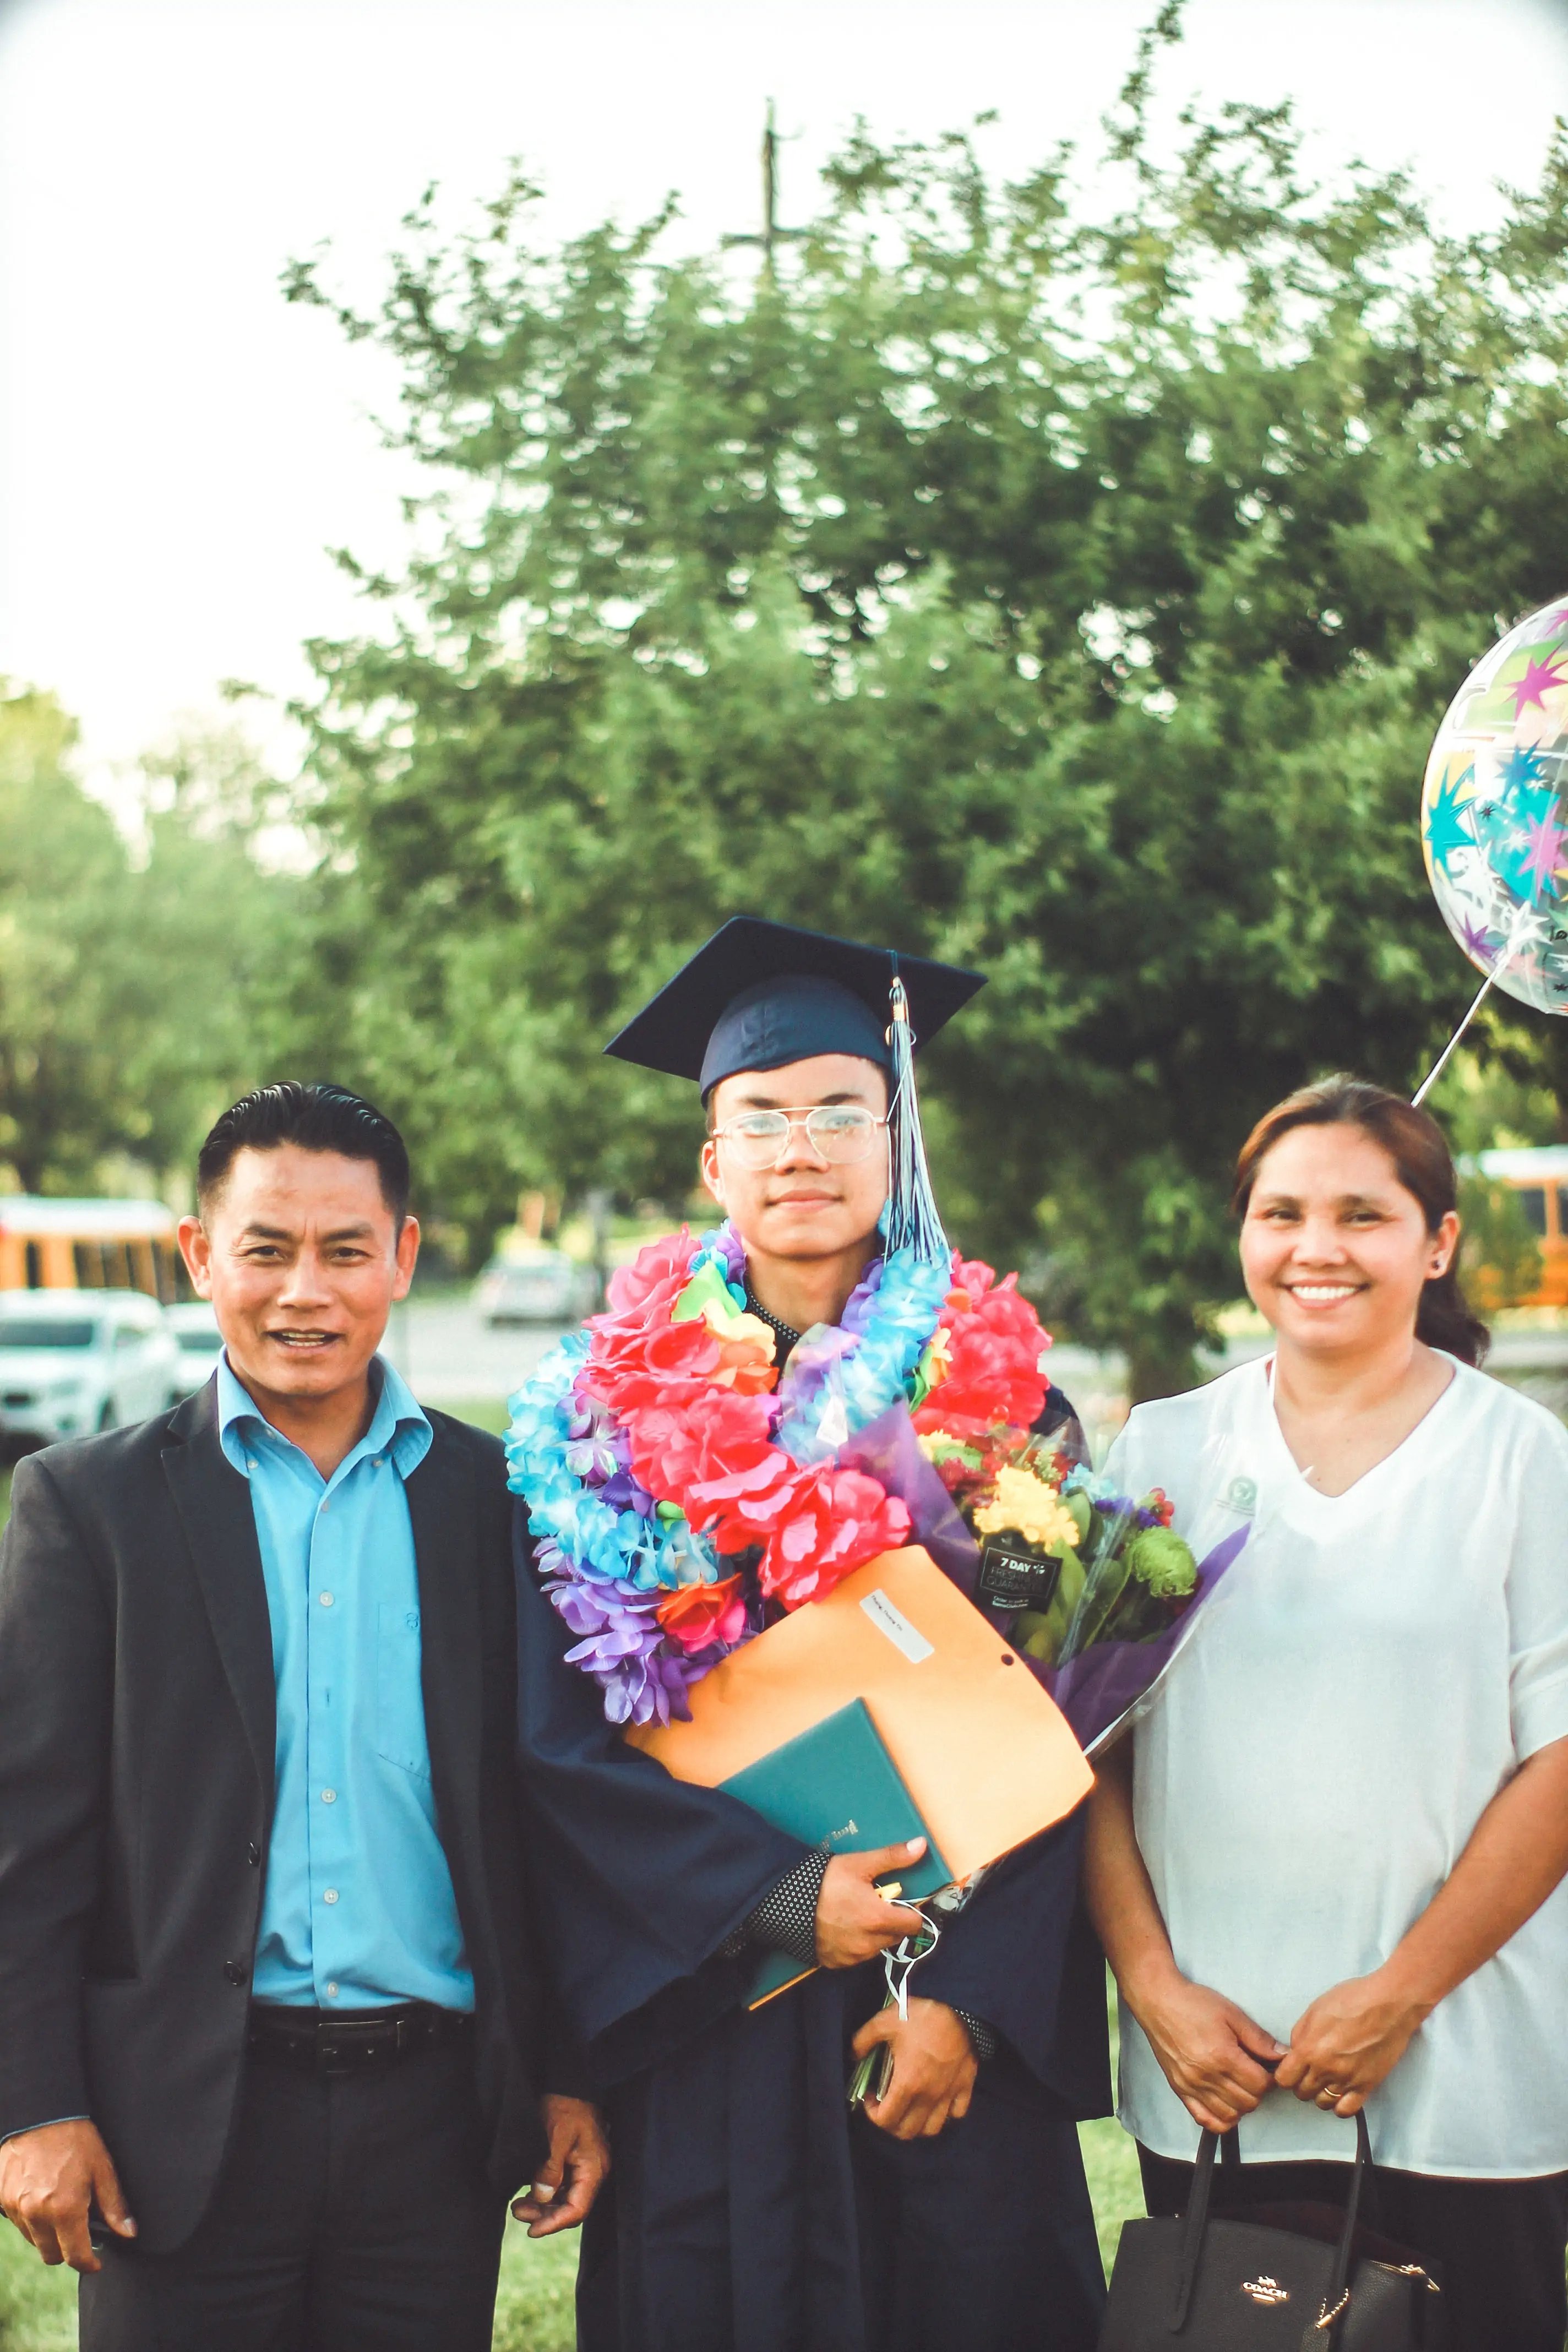 https://www.pexels.com/photo/photo-of-a-man-wearing-academic-gown-together-with-his-parents-2513989/